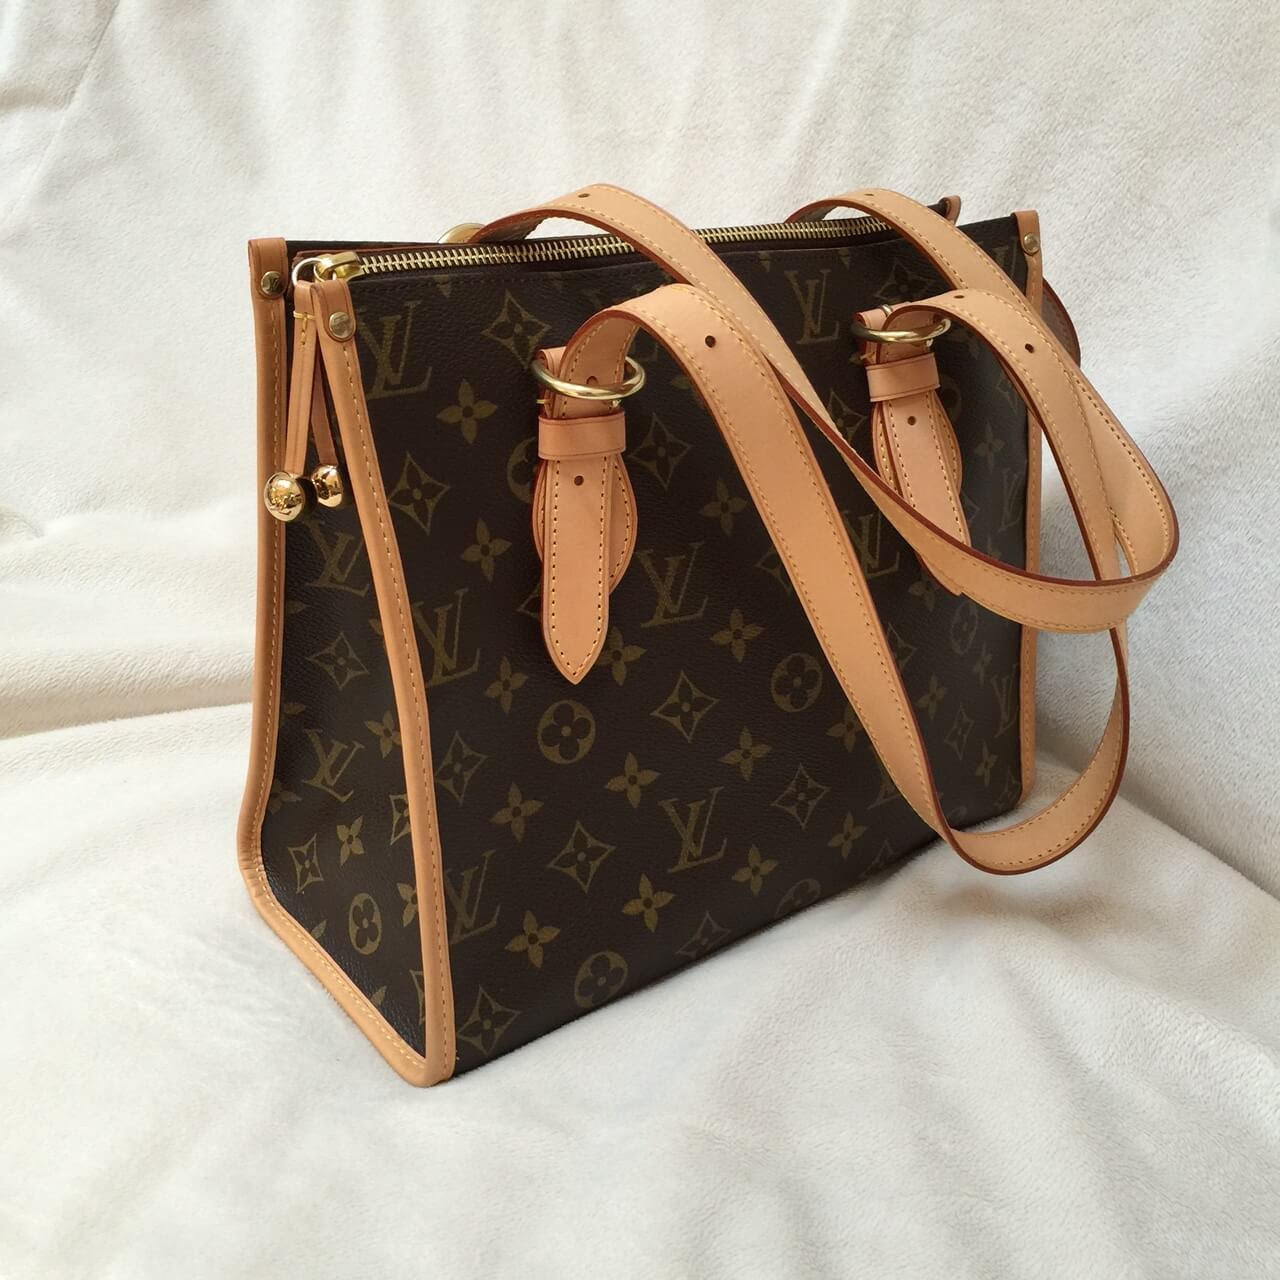 I've had my eye on a vintage LV Malesherbes purse but managed to snag a  vintage calfskin Celine for a fraction of the price : r/handbags